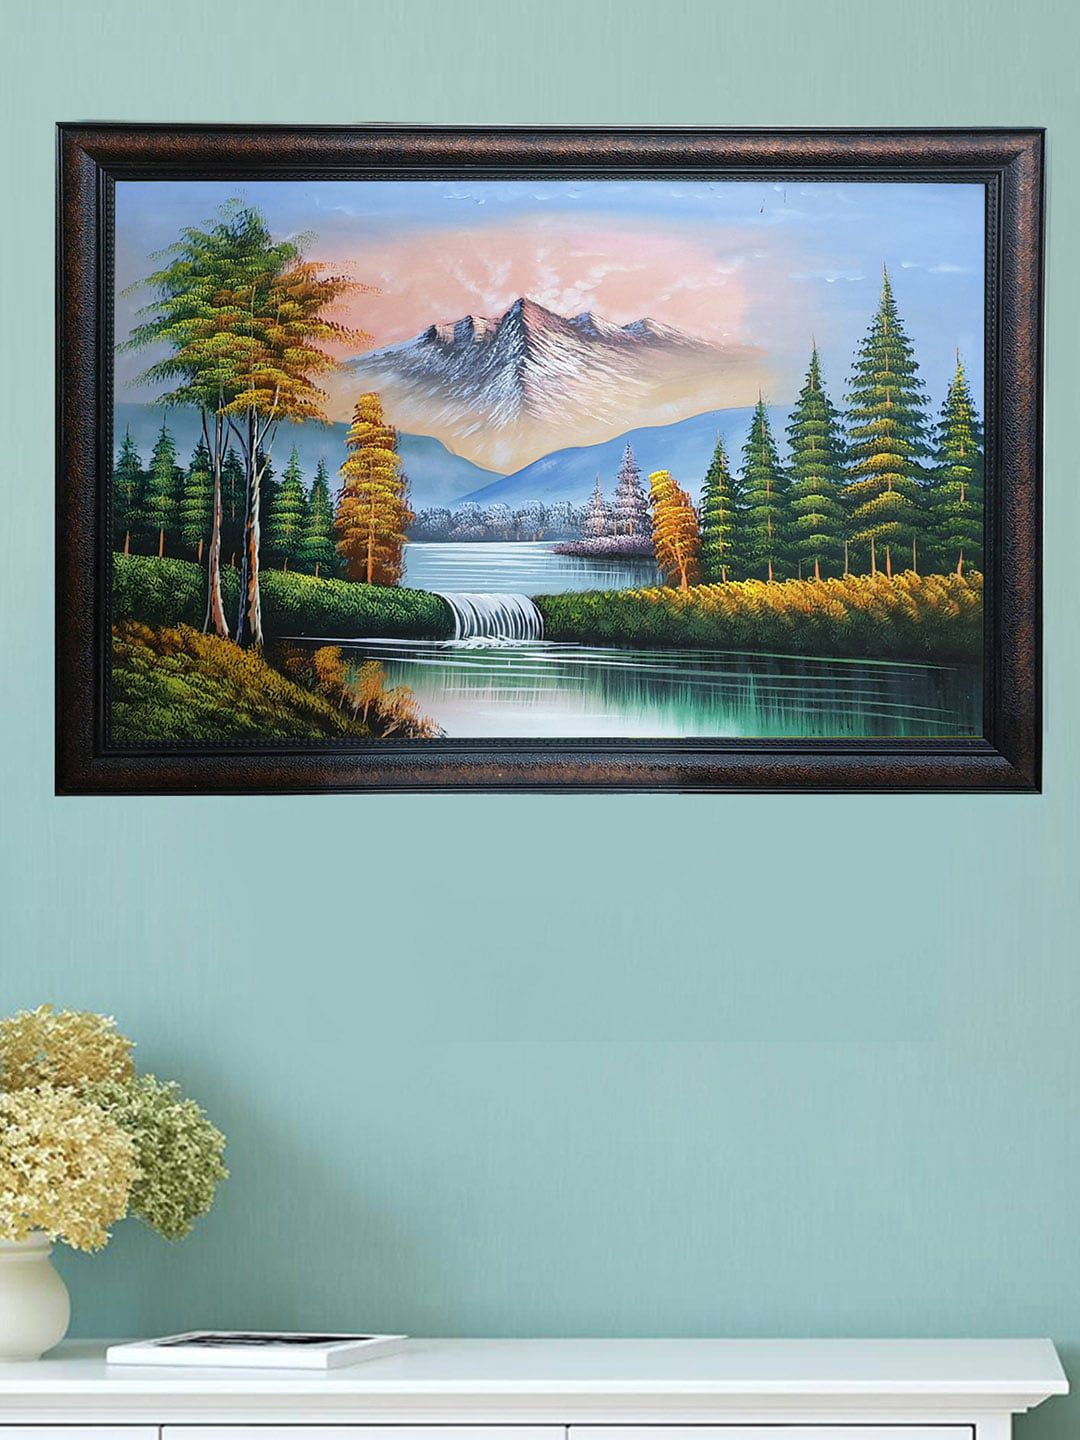 Gallery99 Blue Green & Yellow Printed Framed Wall Art Price in India